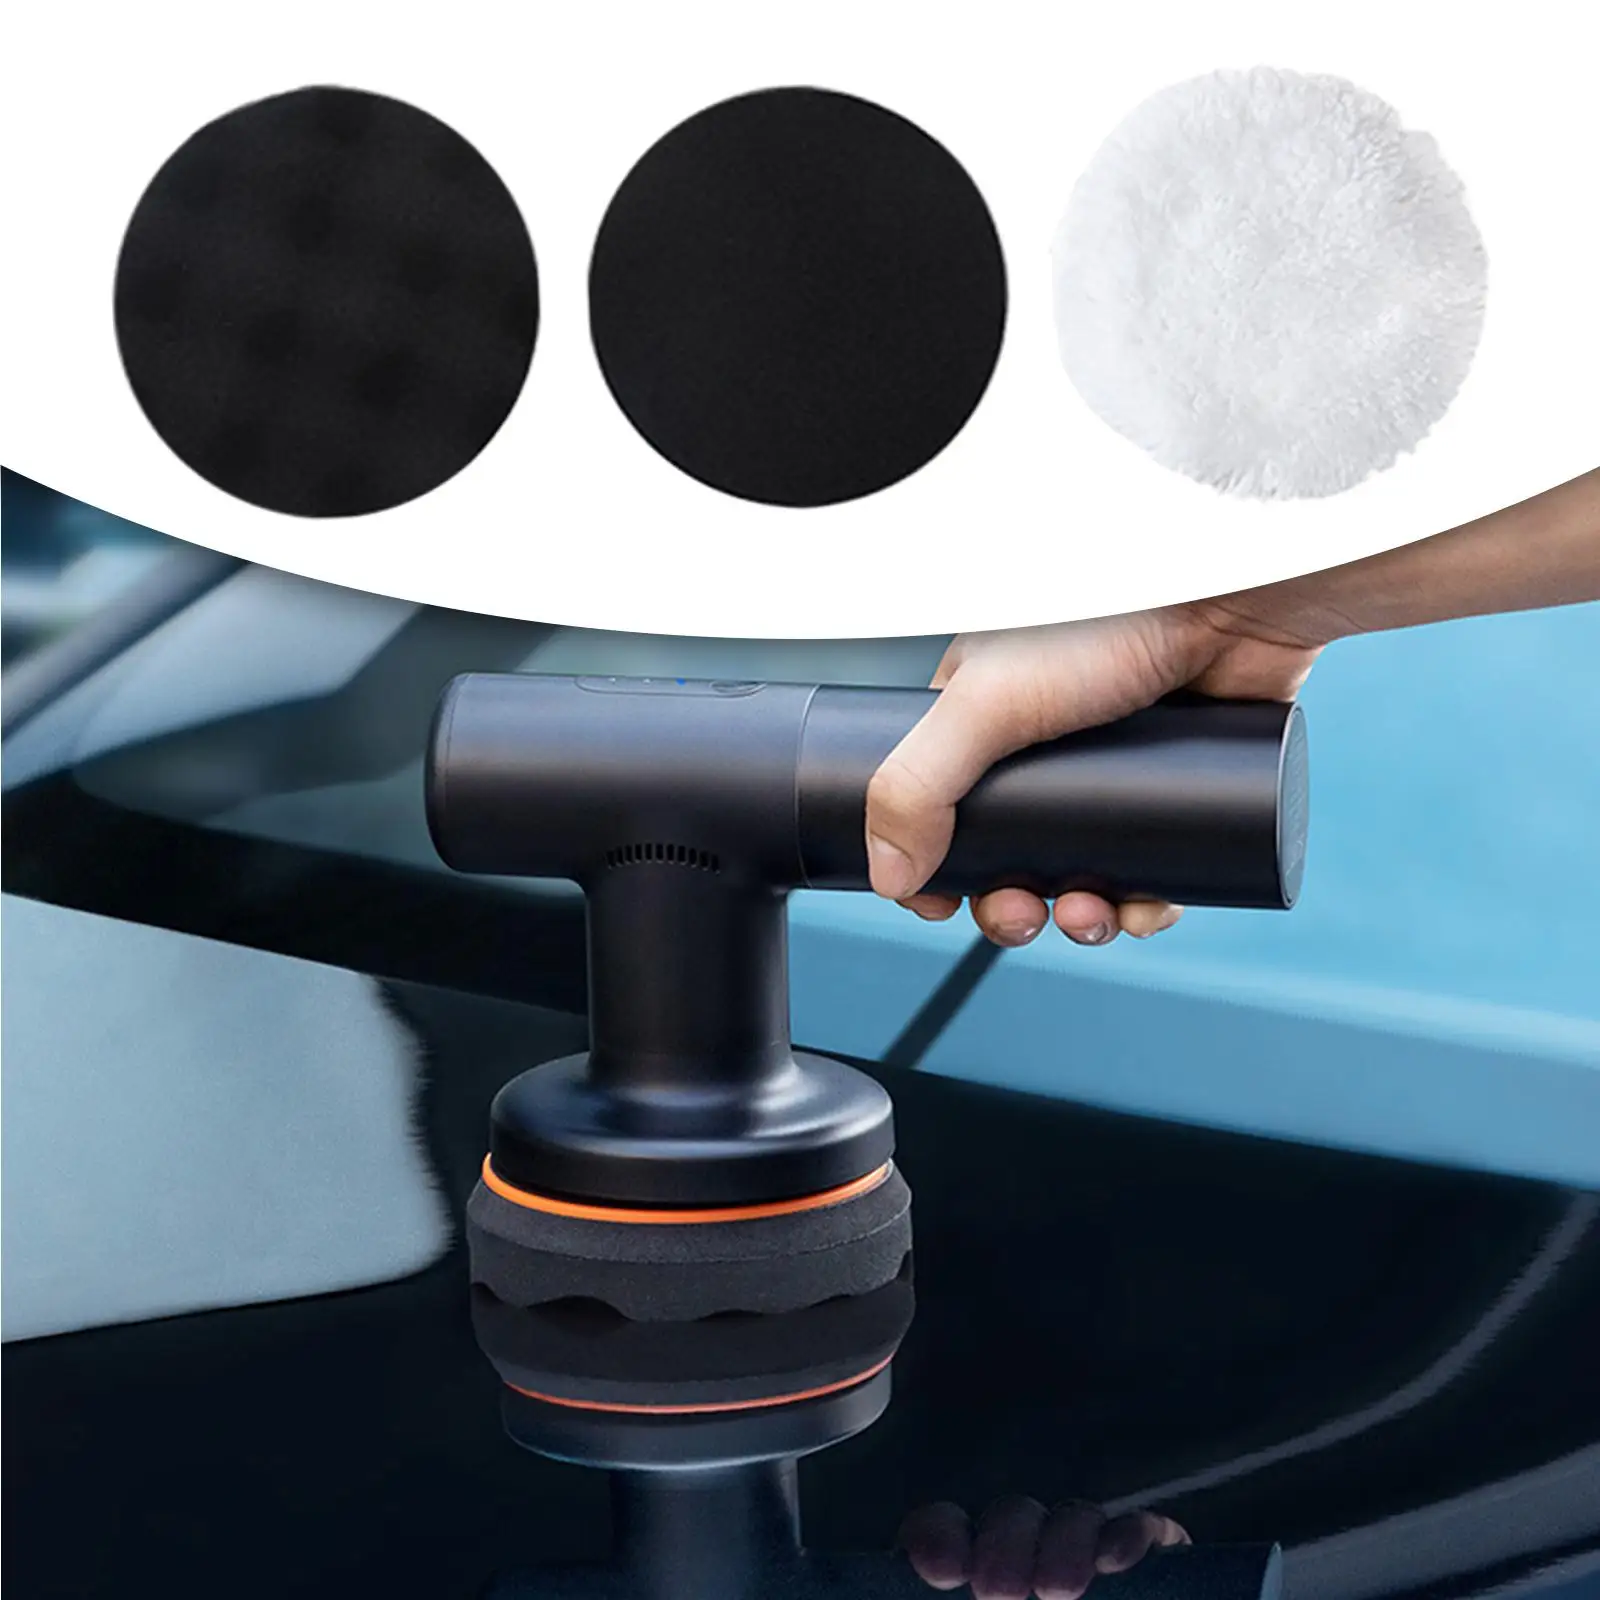 Polishing Pads Kit/Lot Attachment for Drill Electric Paint Flat Foam  Buffer Polisher Fits for Car Household Furniture